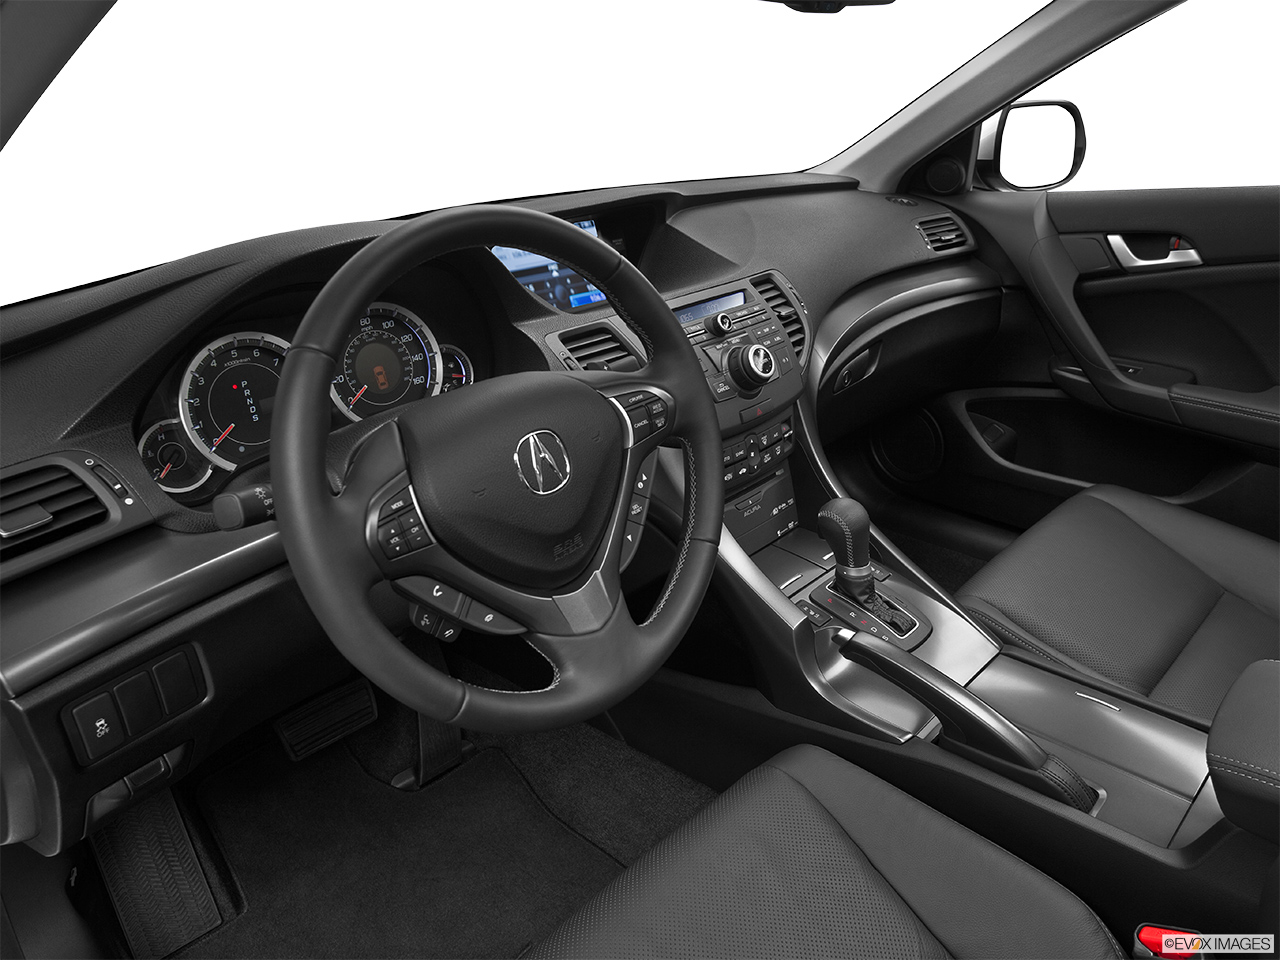 2013 Acura TSX 5-Speed Automatic Interior Hero (driver's side). 